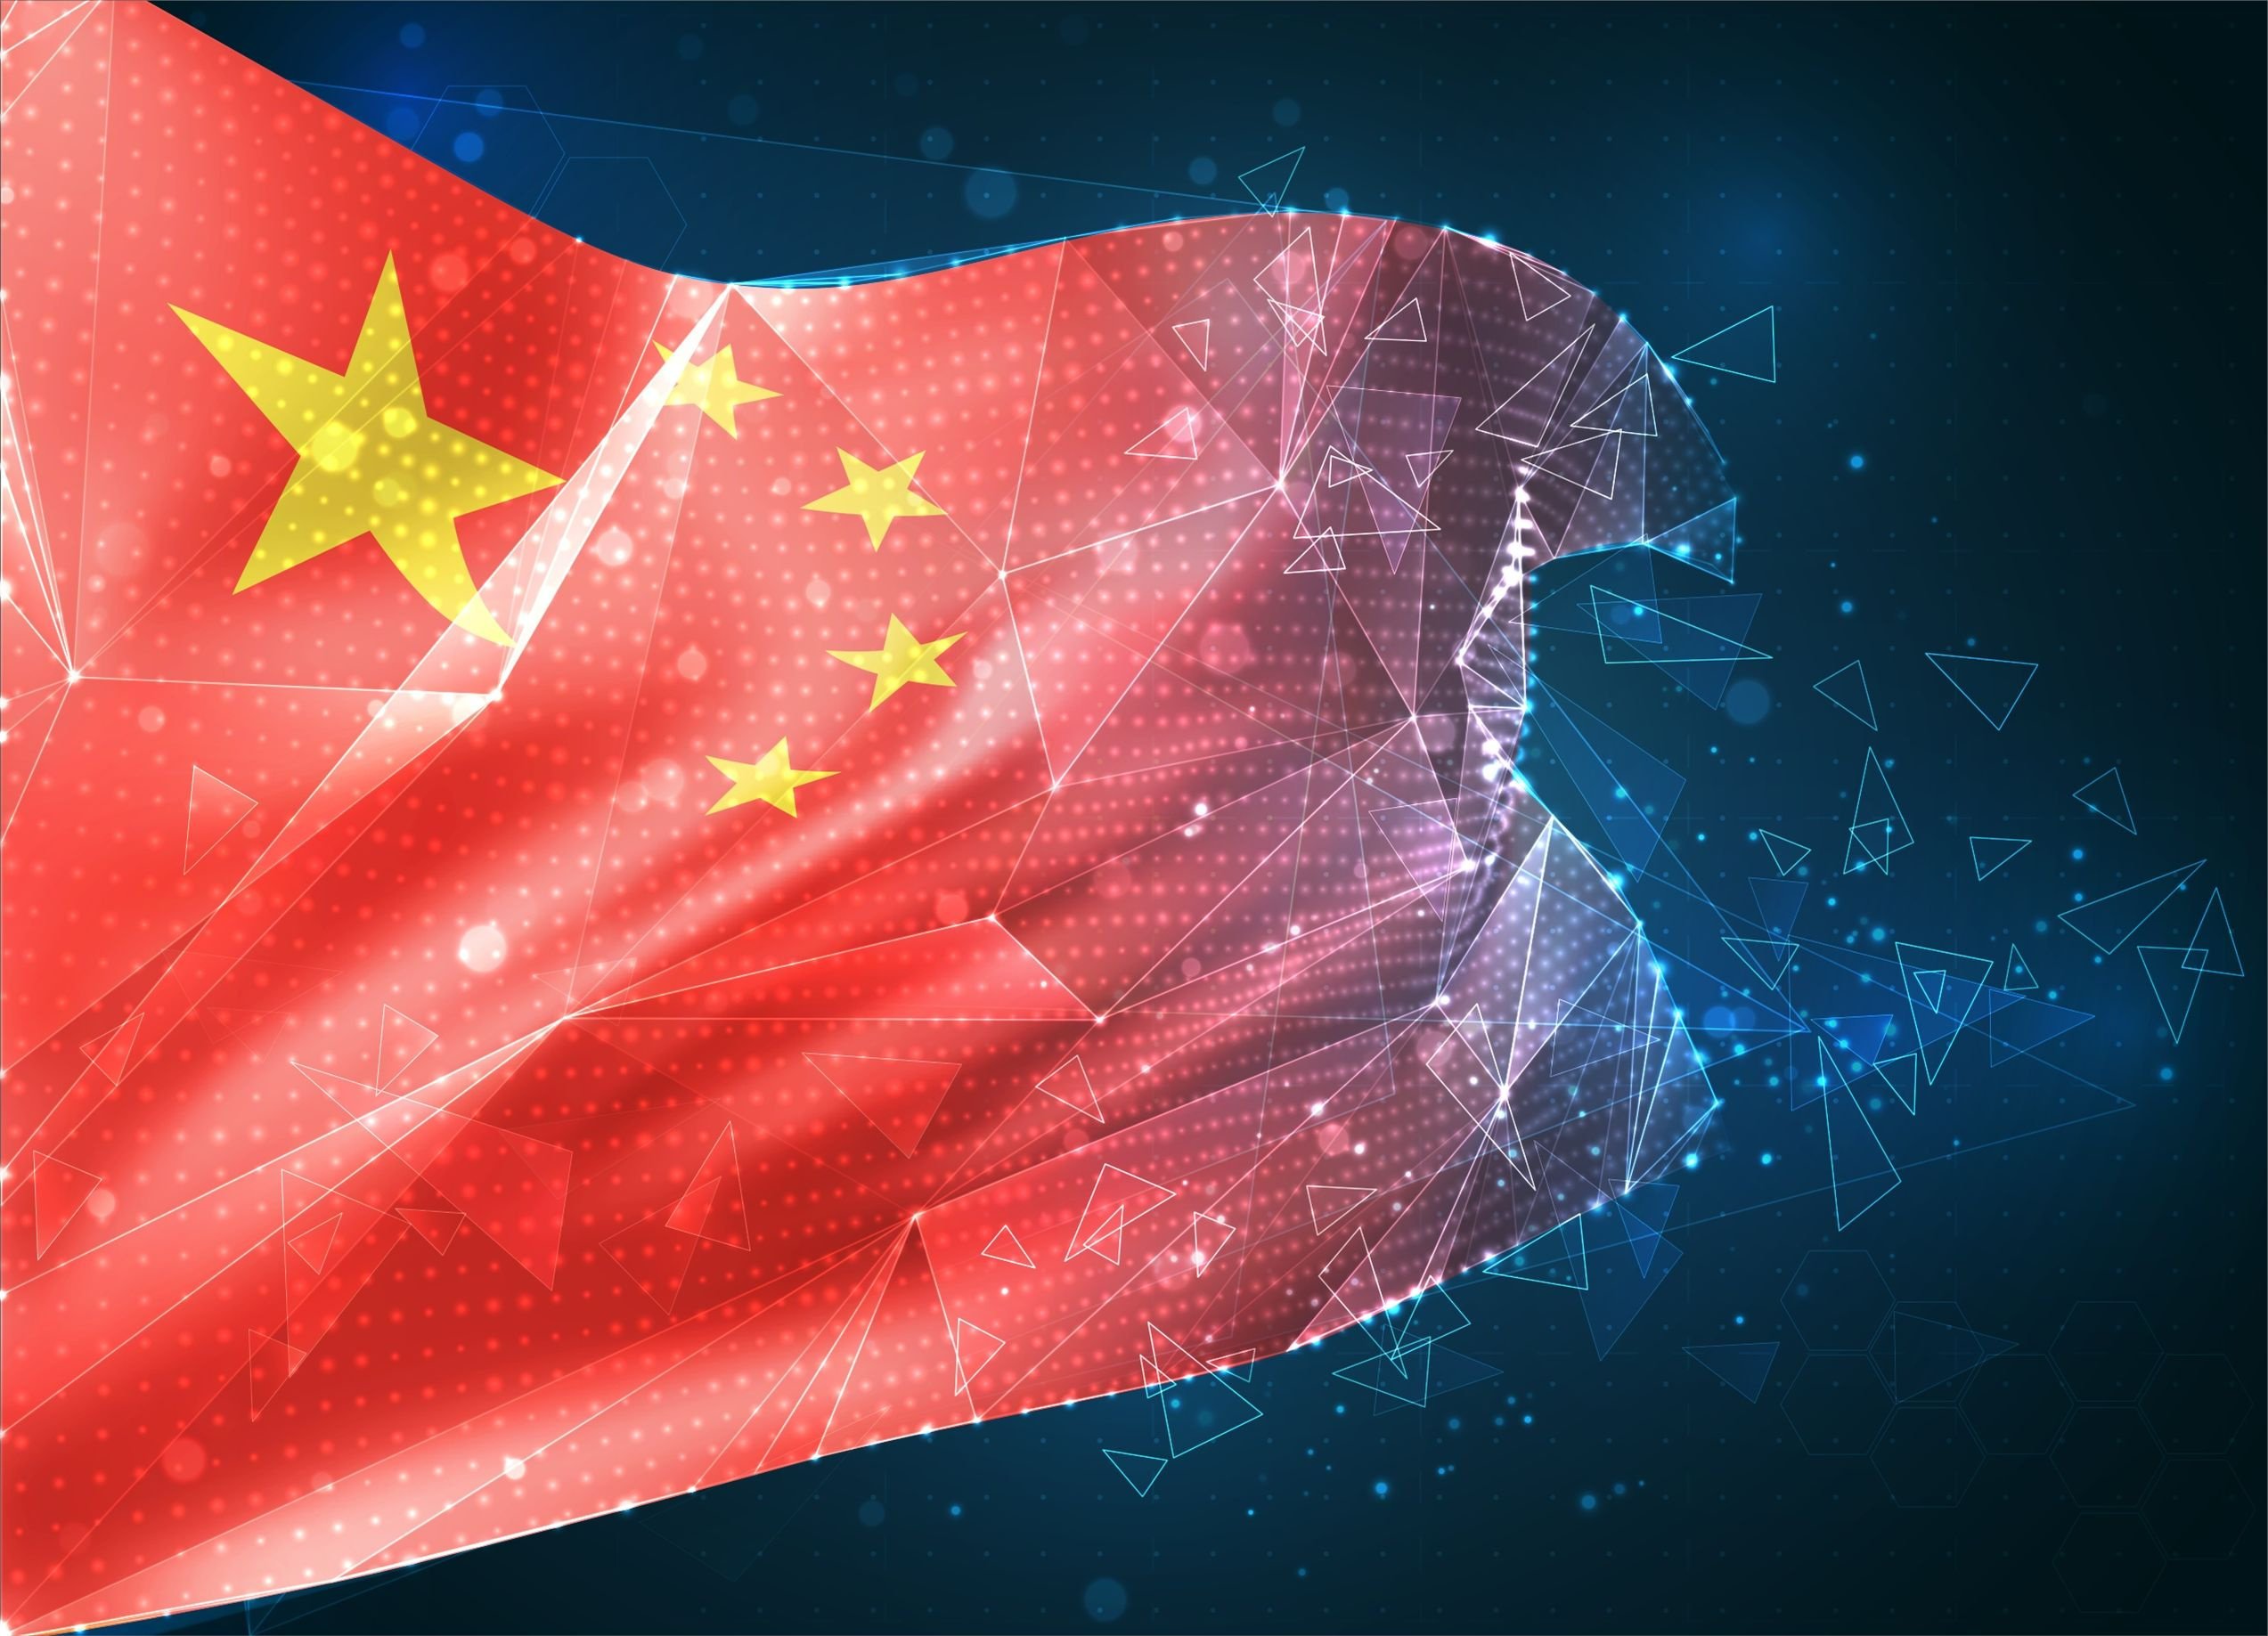 Beijing officials promoted a China-led cyber governance at the Digital Silk Road forum in Xian on Tuesday. Photo: Shutterstock